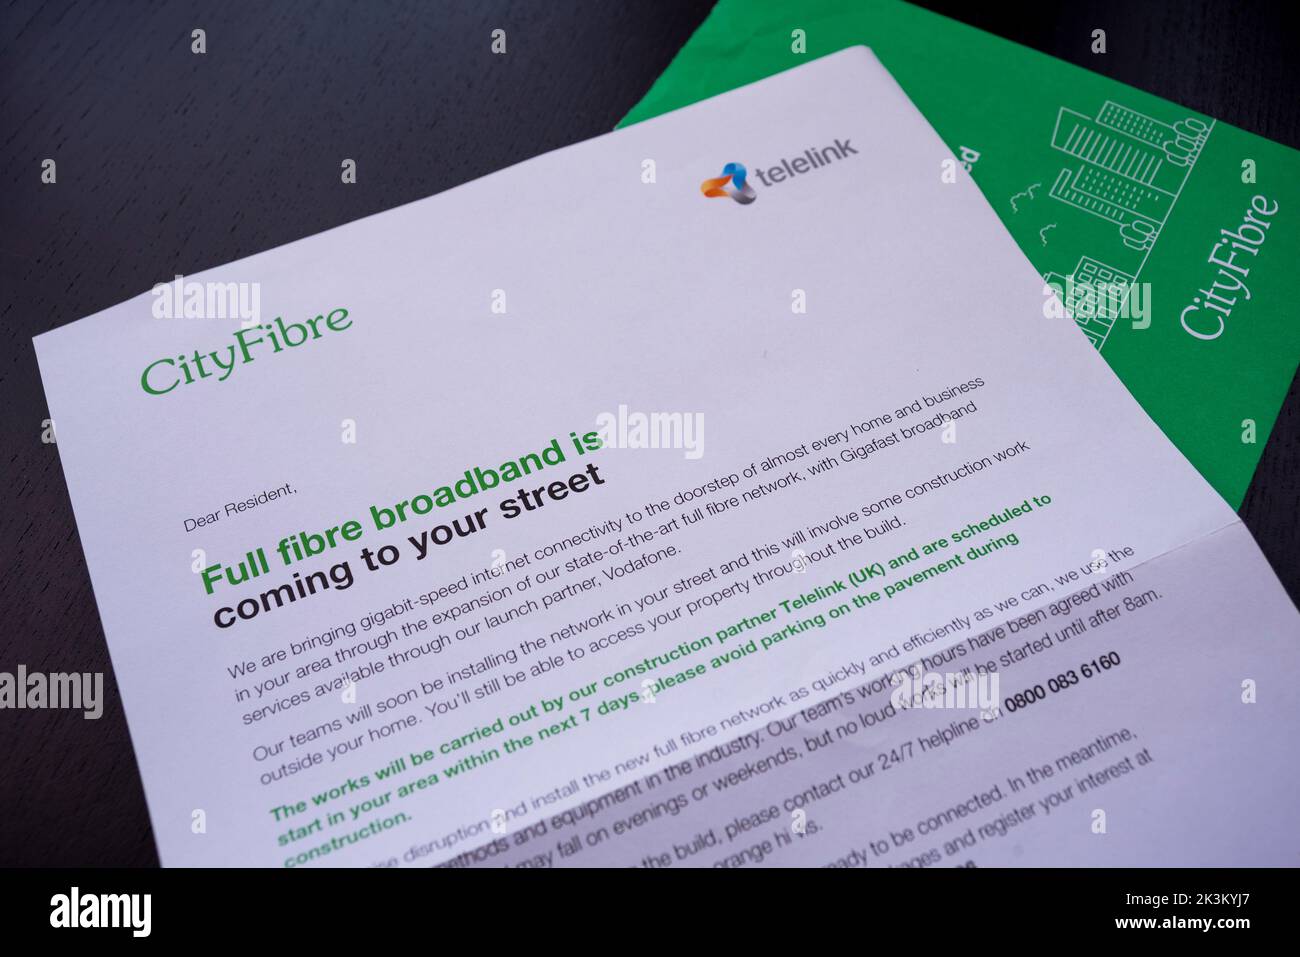 Letter from CityFibre notifying of disruption due to full fibre broadband being installed in the area which will involve road closures and parking res Stock Photo